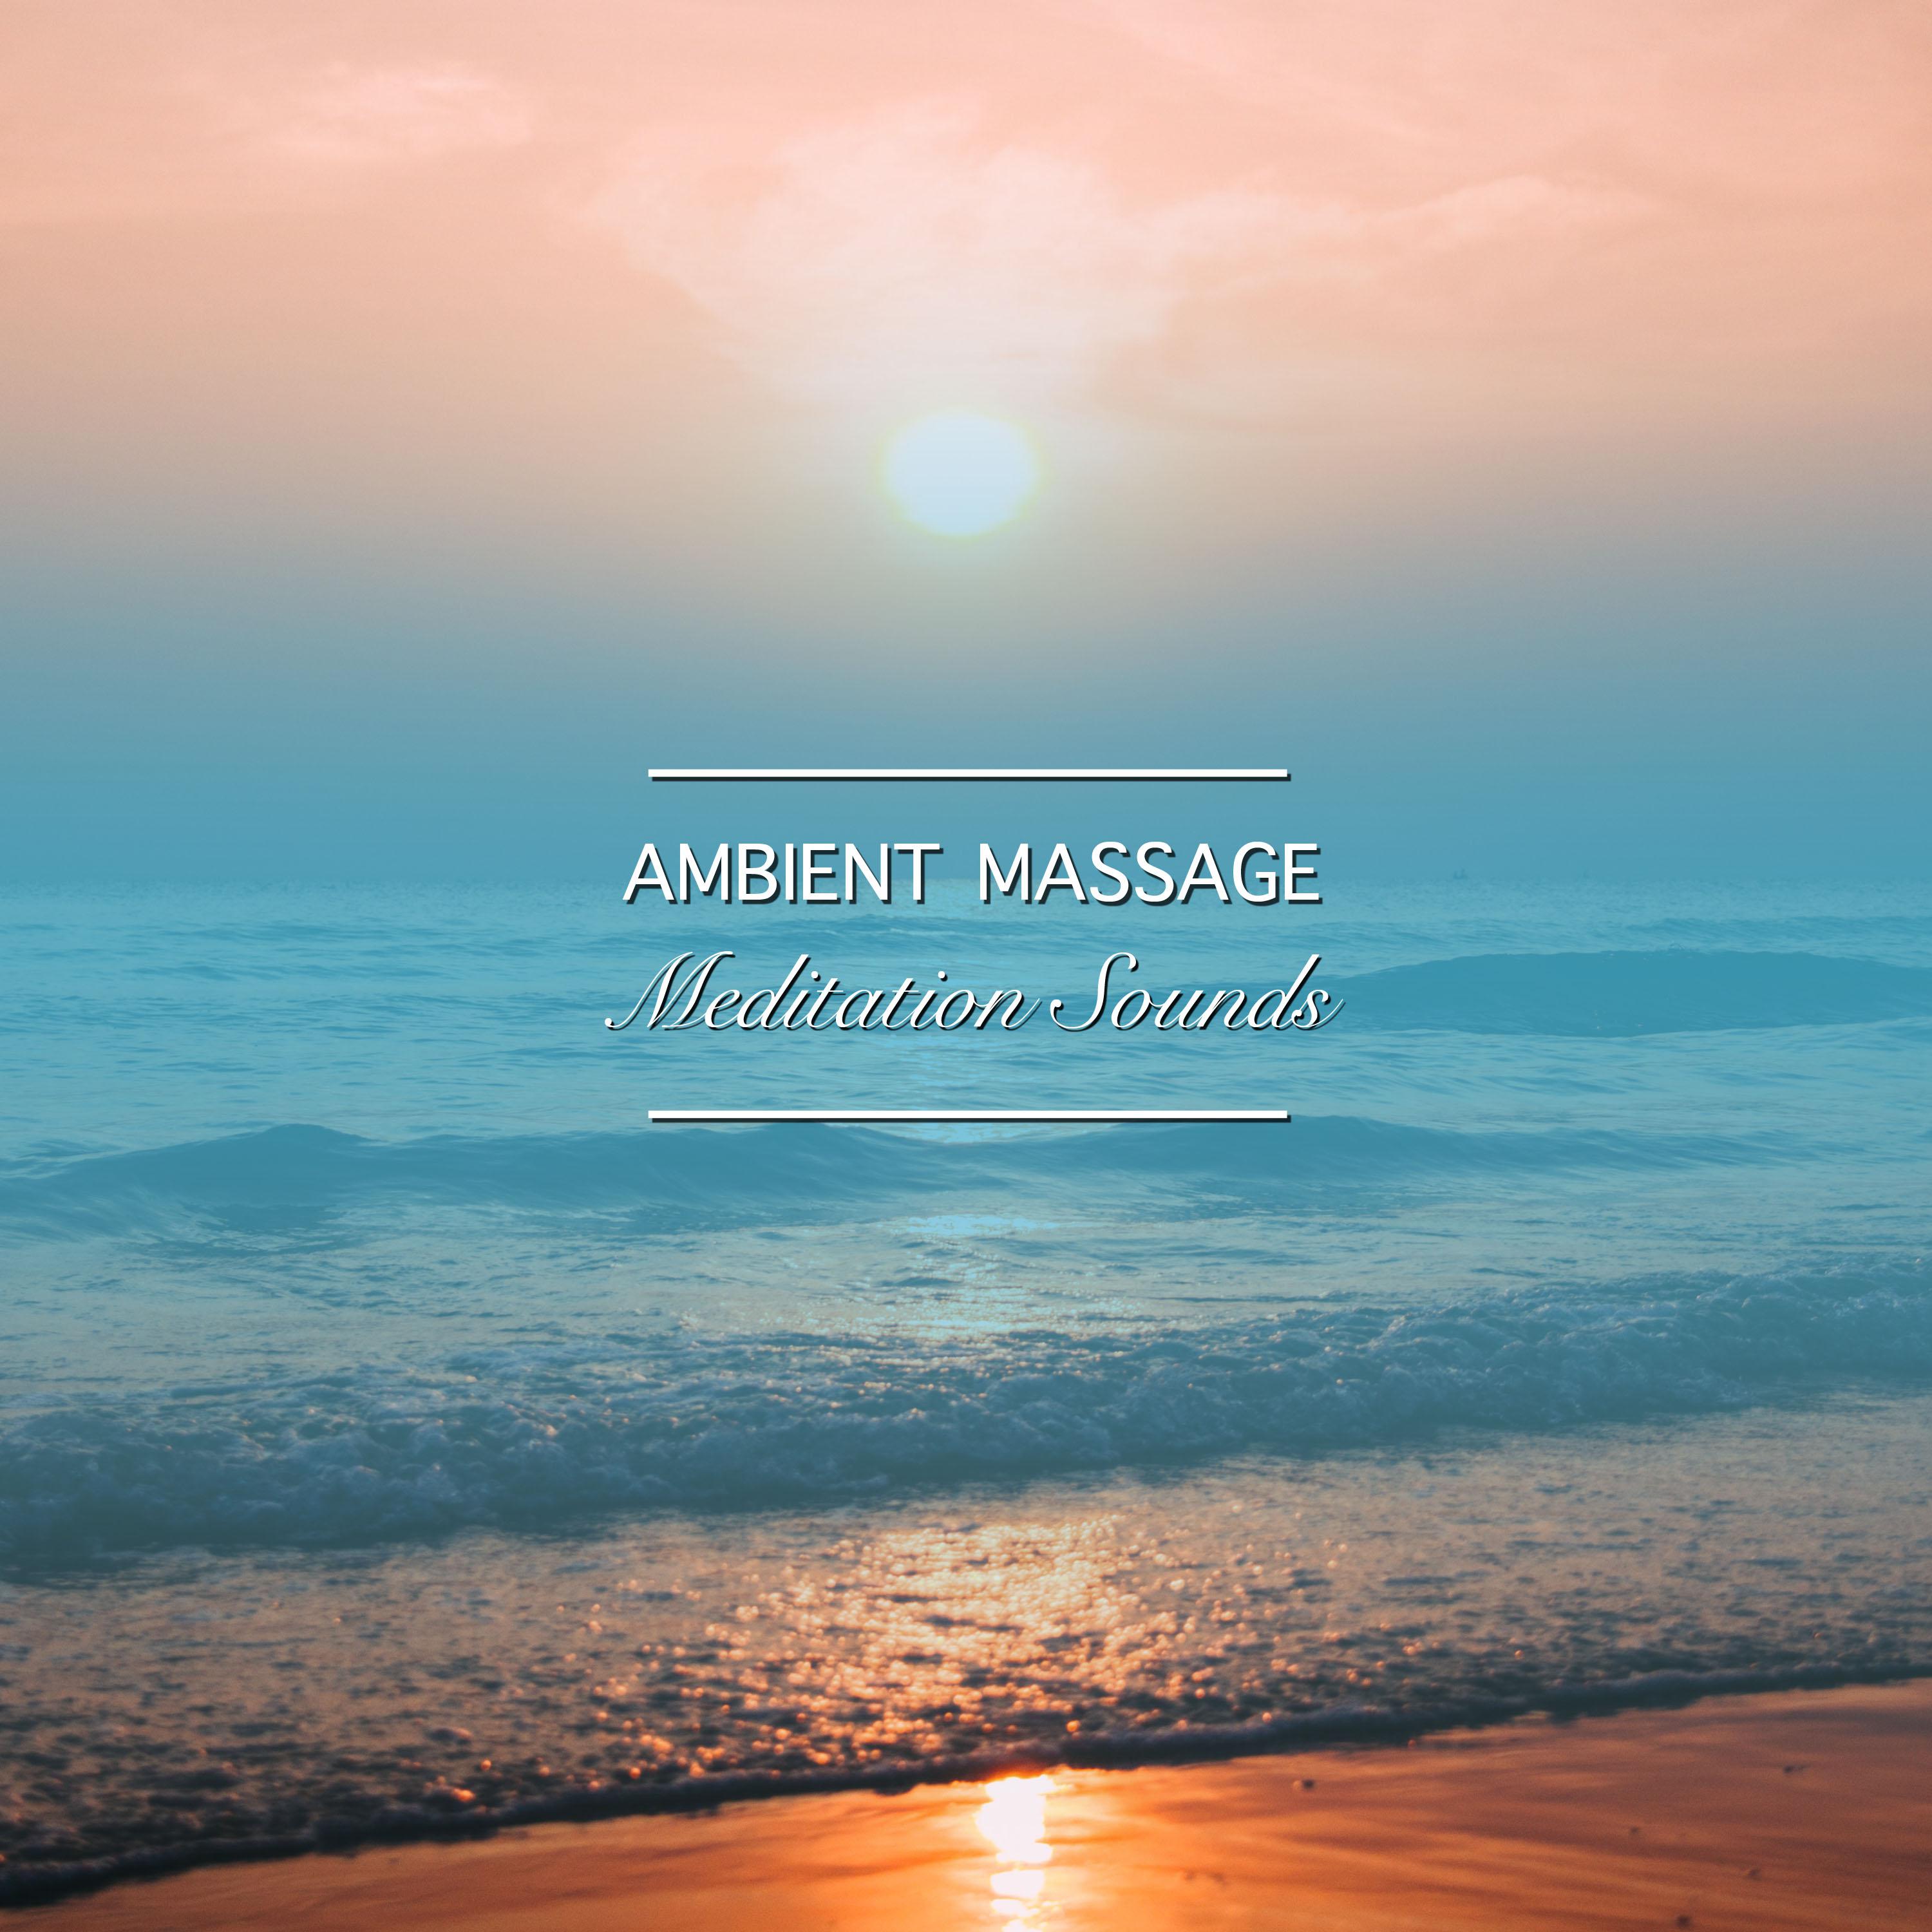 25 Ambient Massage and Meditation Sounds